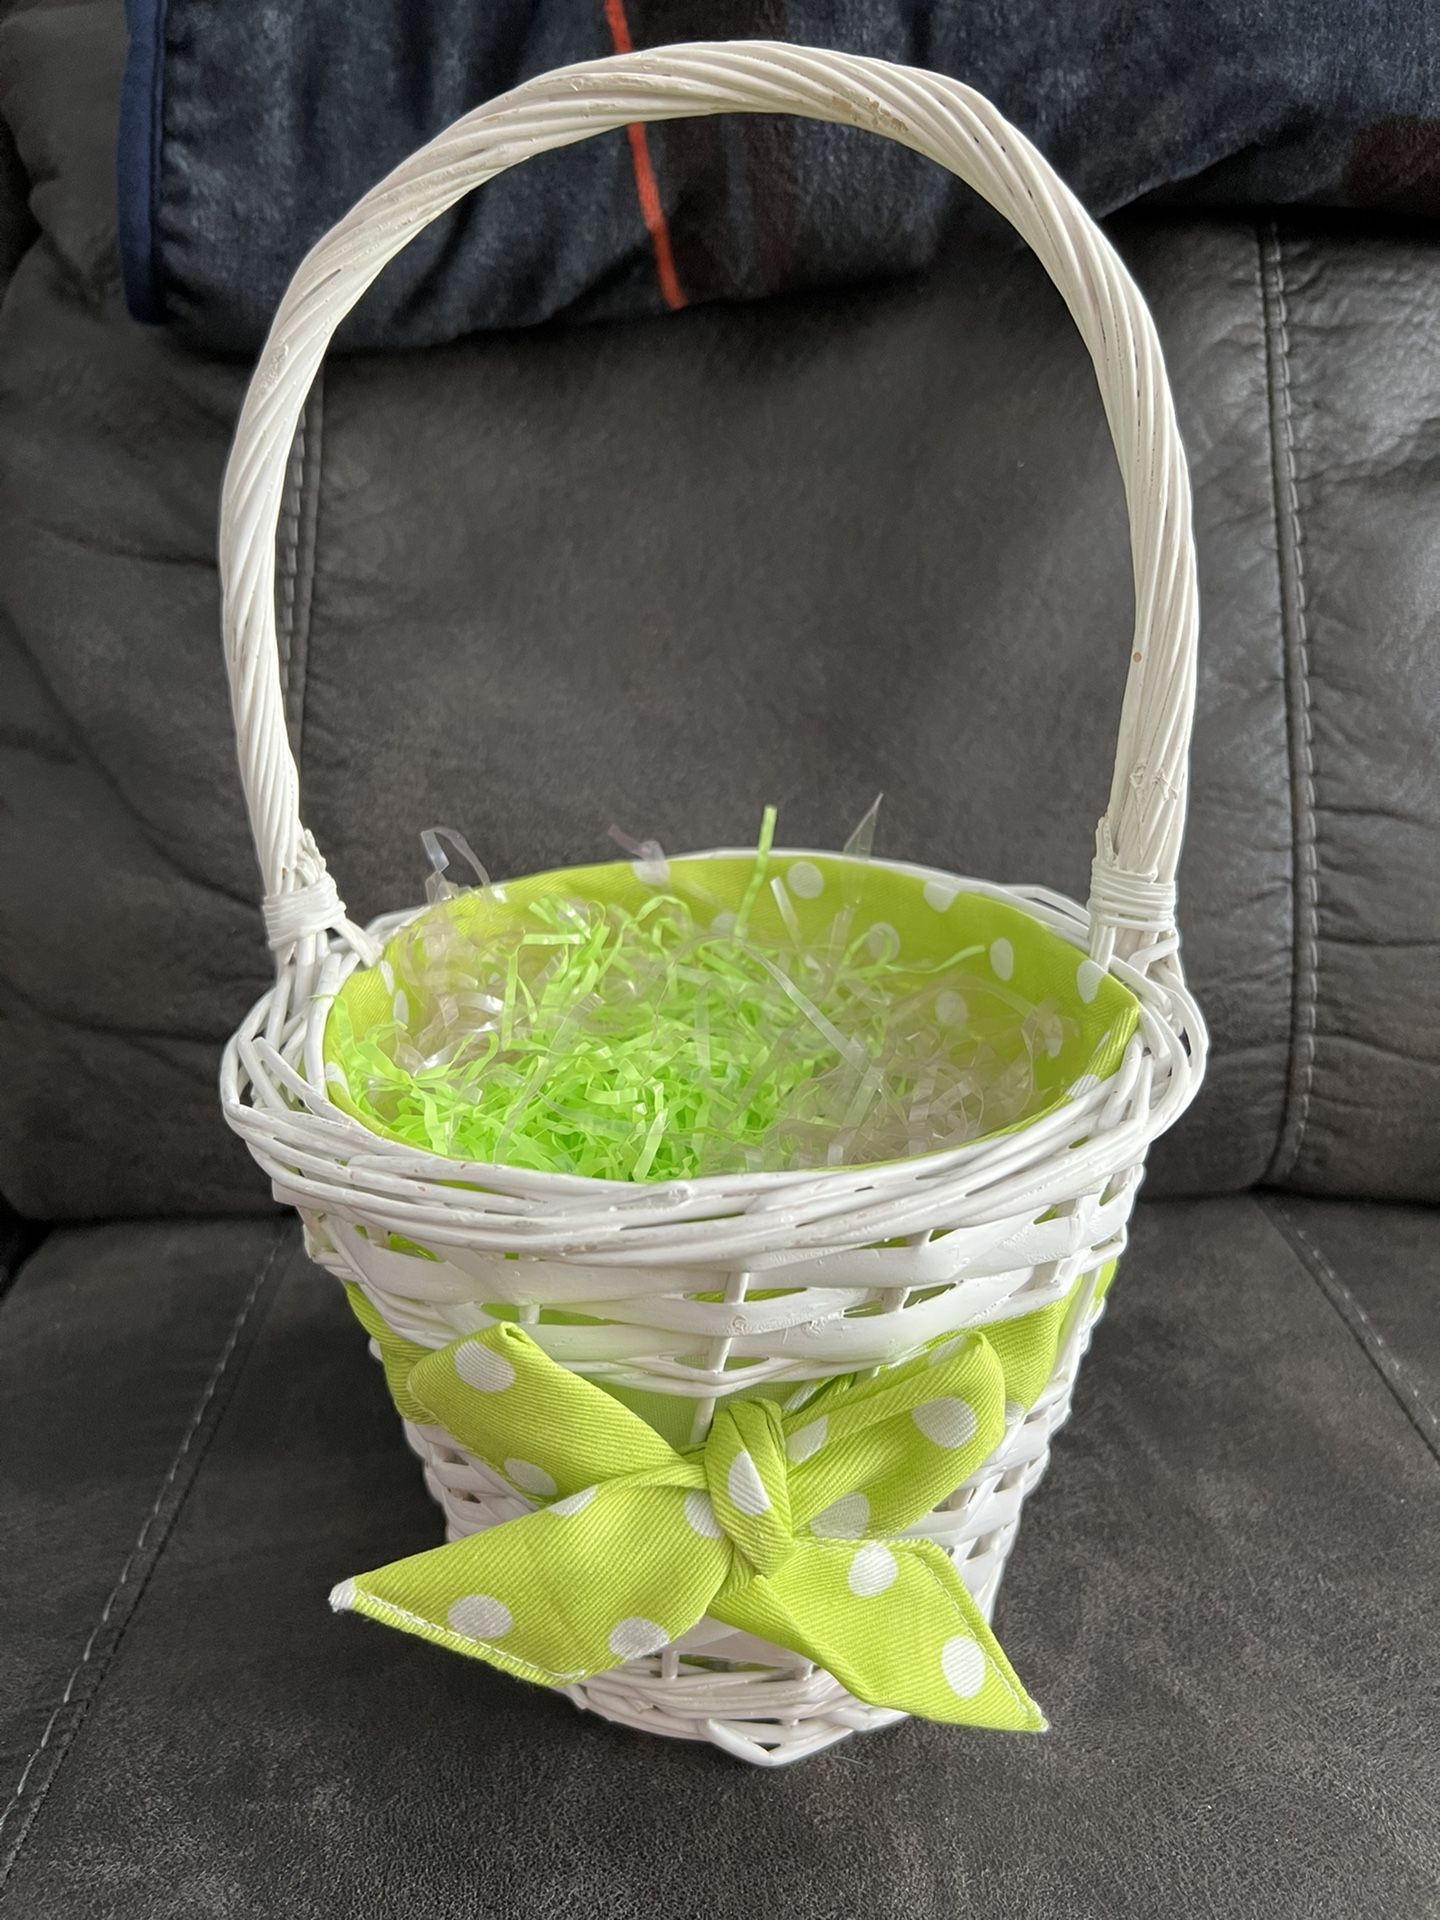 Decorated Easter Basket, Brand New!